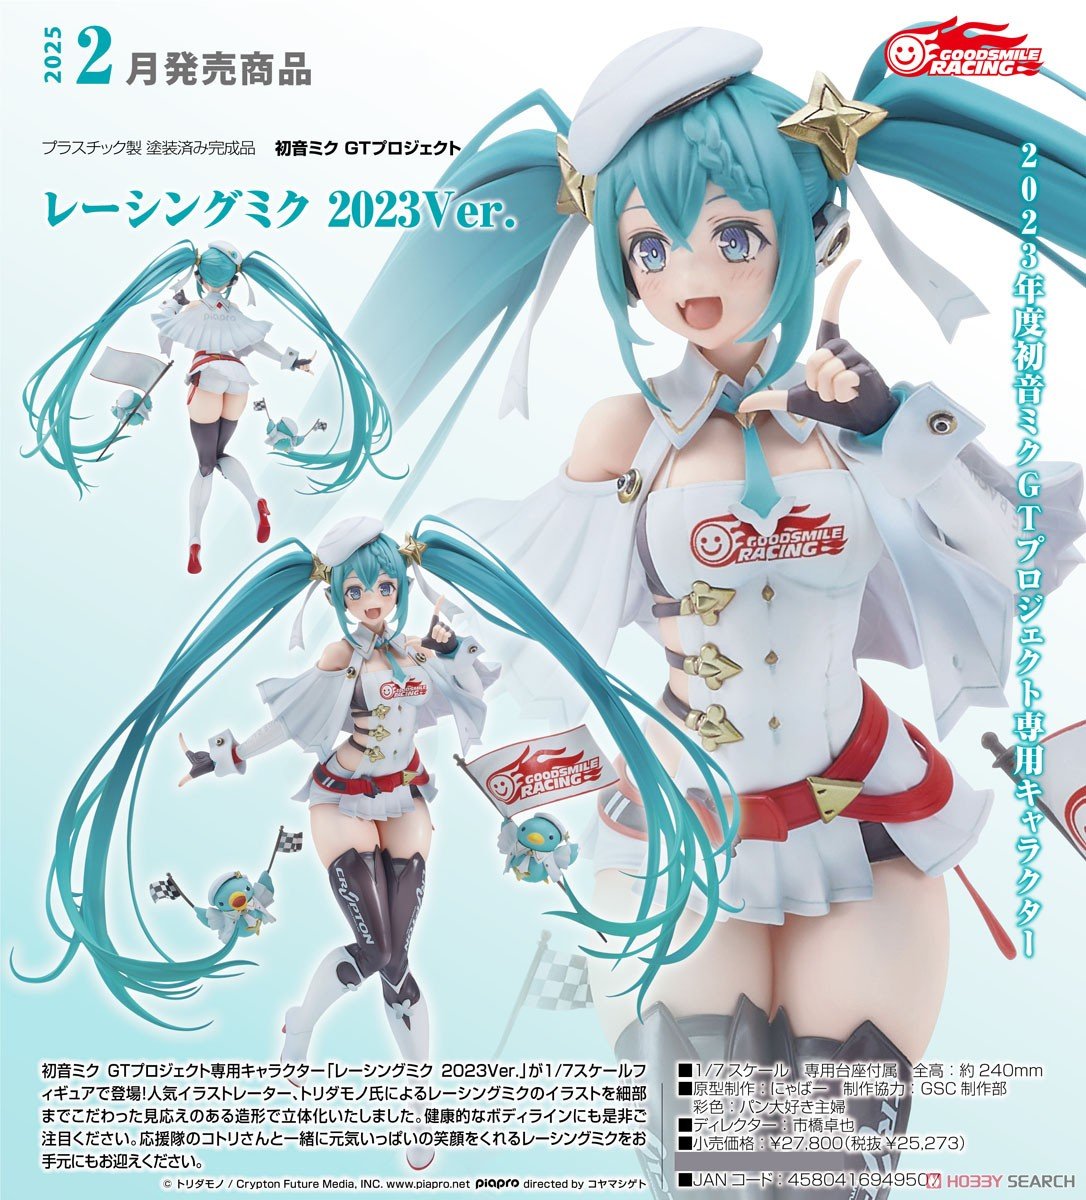 SheetNo:75839 <OrderPrice$1415> #賽車初音(2023)=1/7 初音未來 GT Project Figure